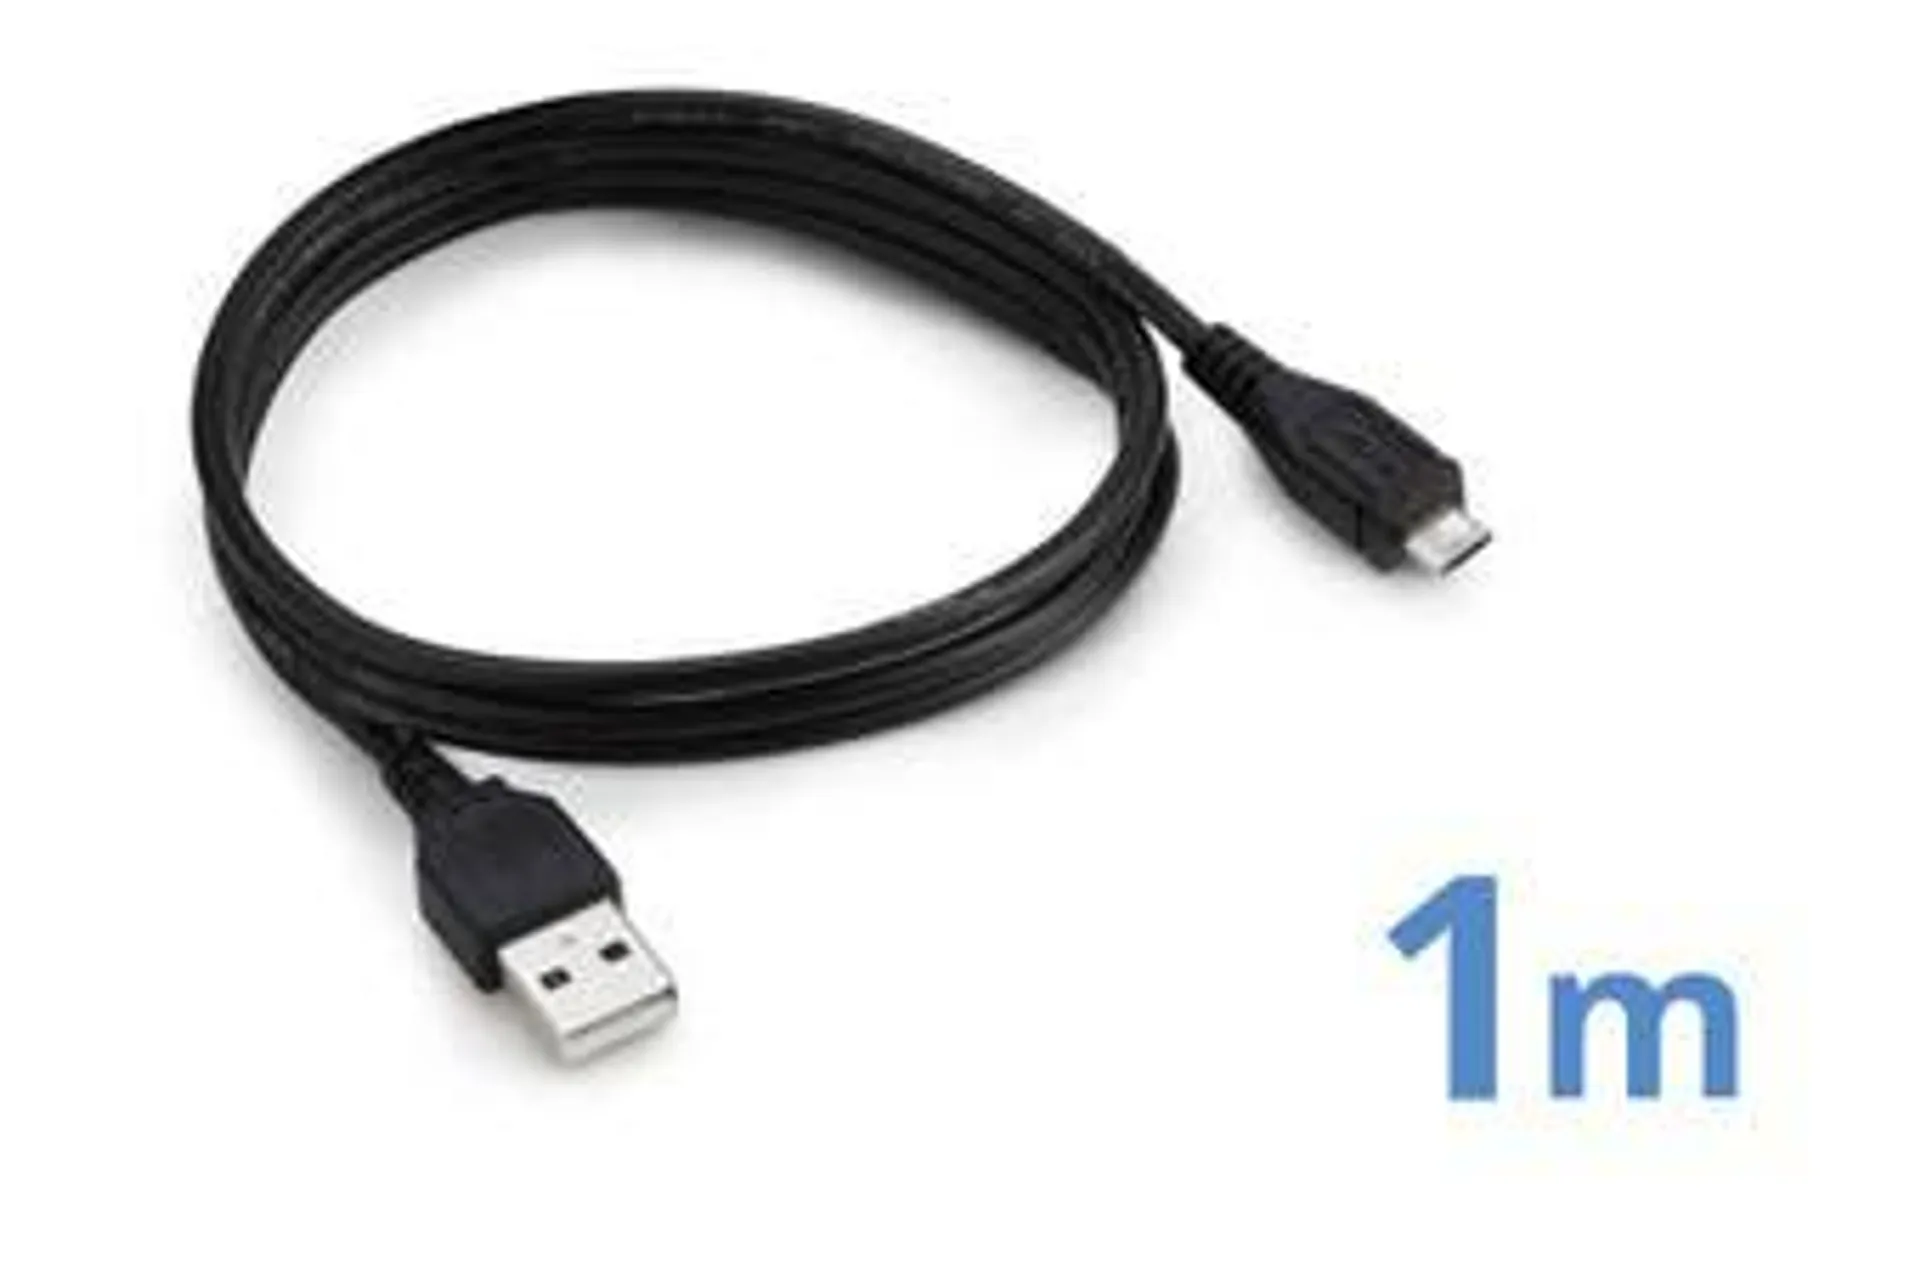 Micro USB to USB Cable (1m)